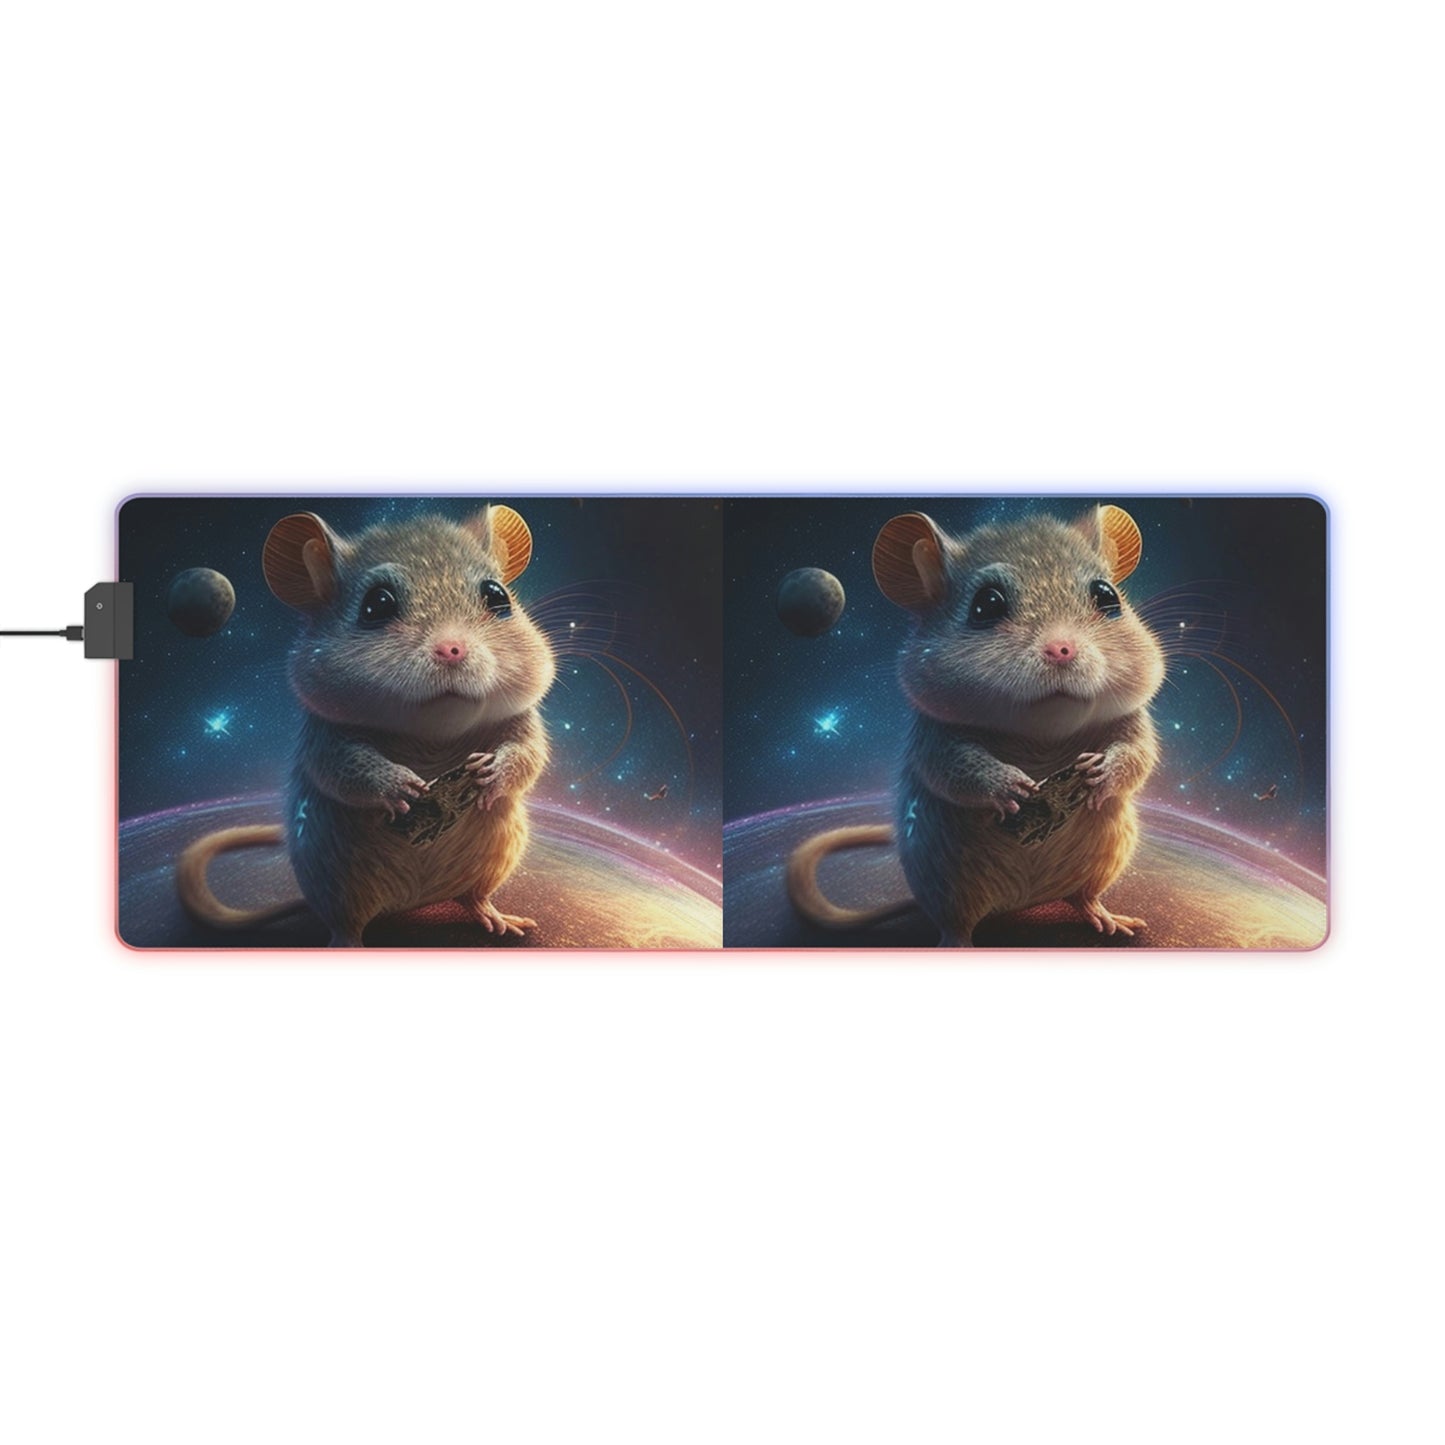 LED Gaming Mouse Pad Mouse On The Moon 3